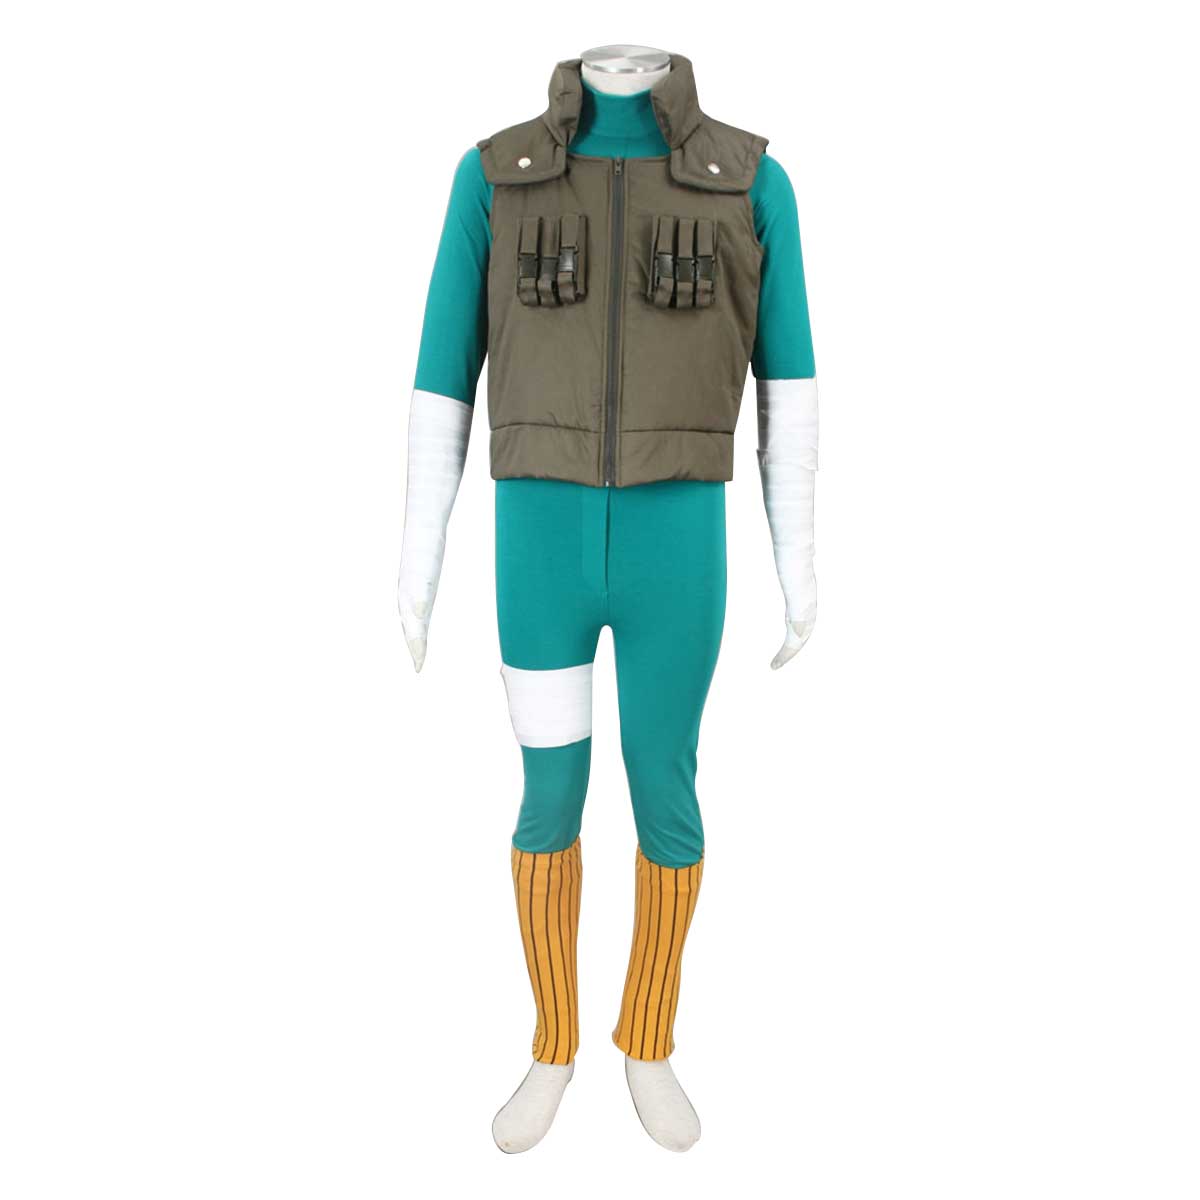 Naruto Shippuden Rock Lee 2 Anime Cosplay Costumes Outfit